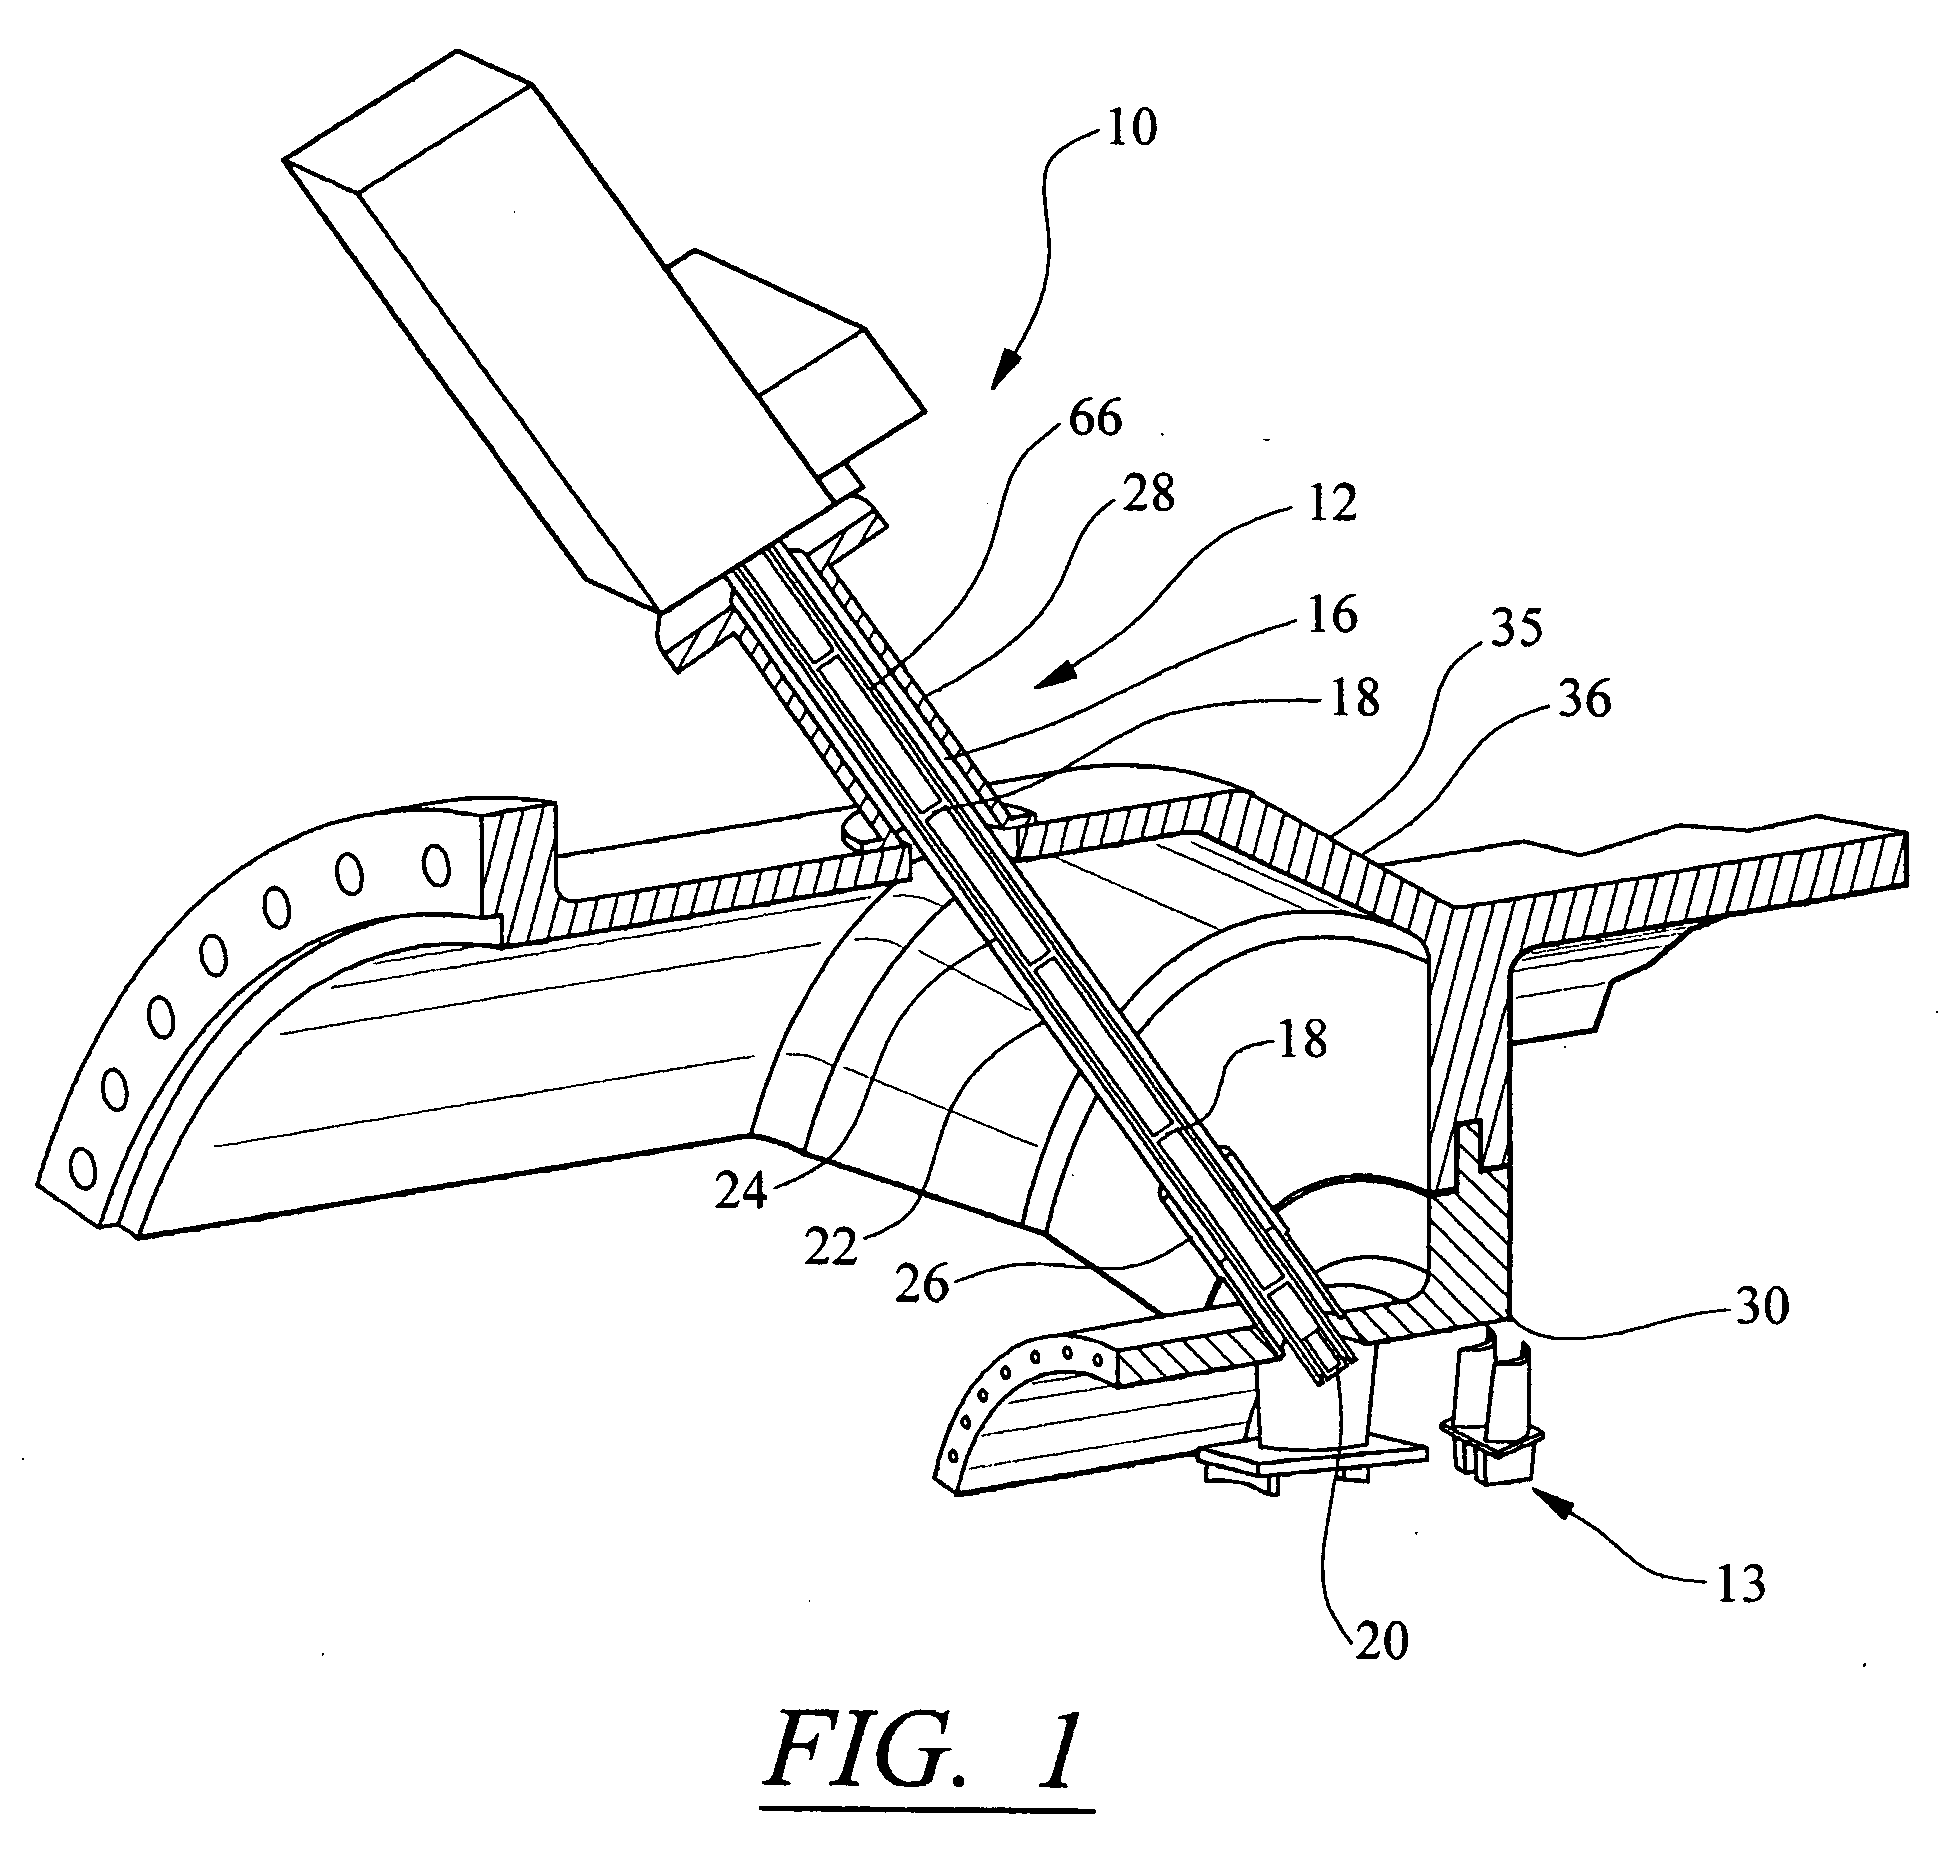 Inspection system for a turbine blade region of a turbine engine